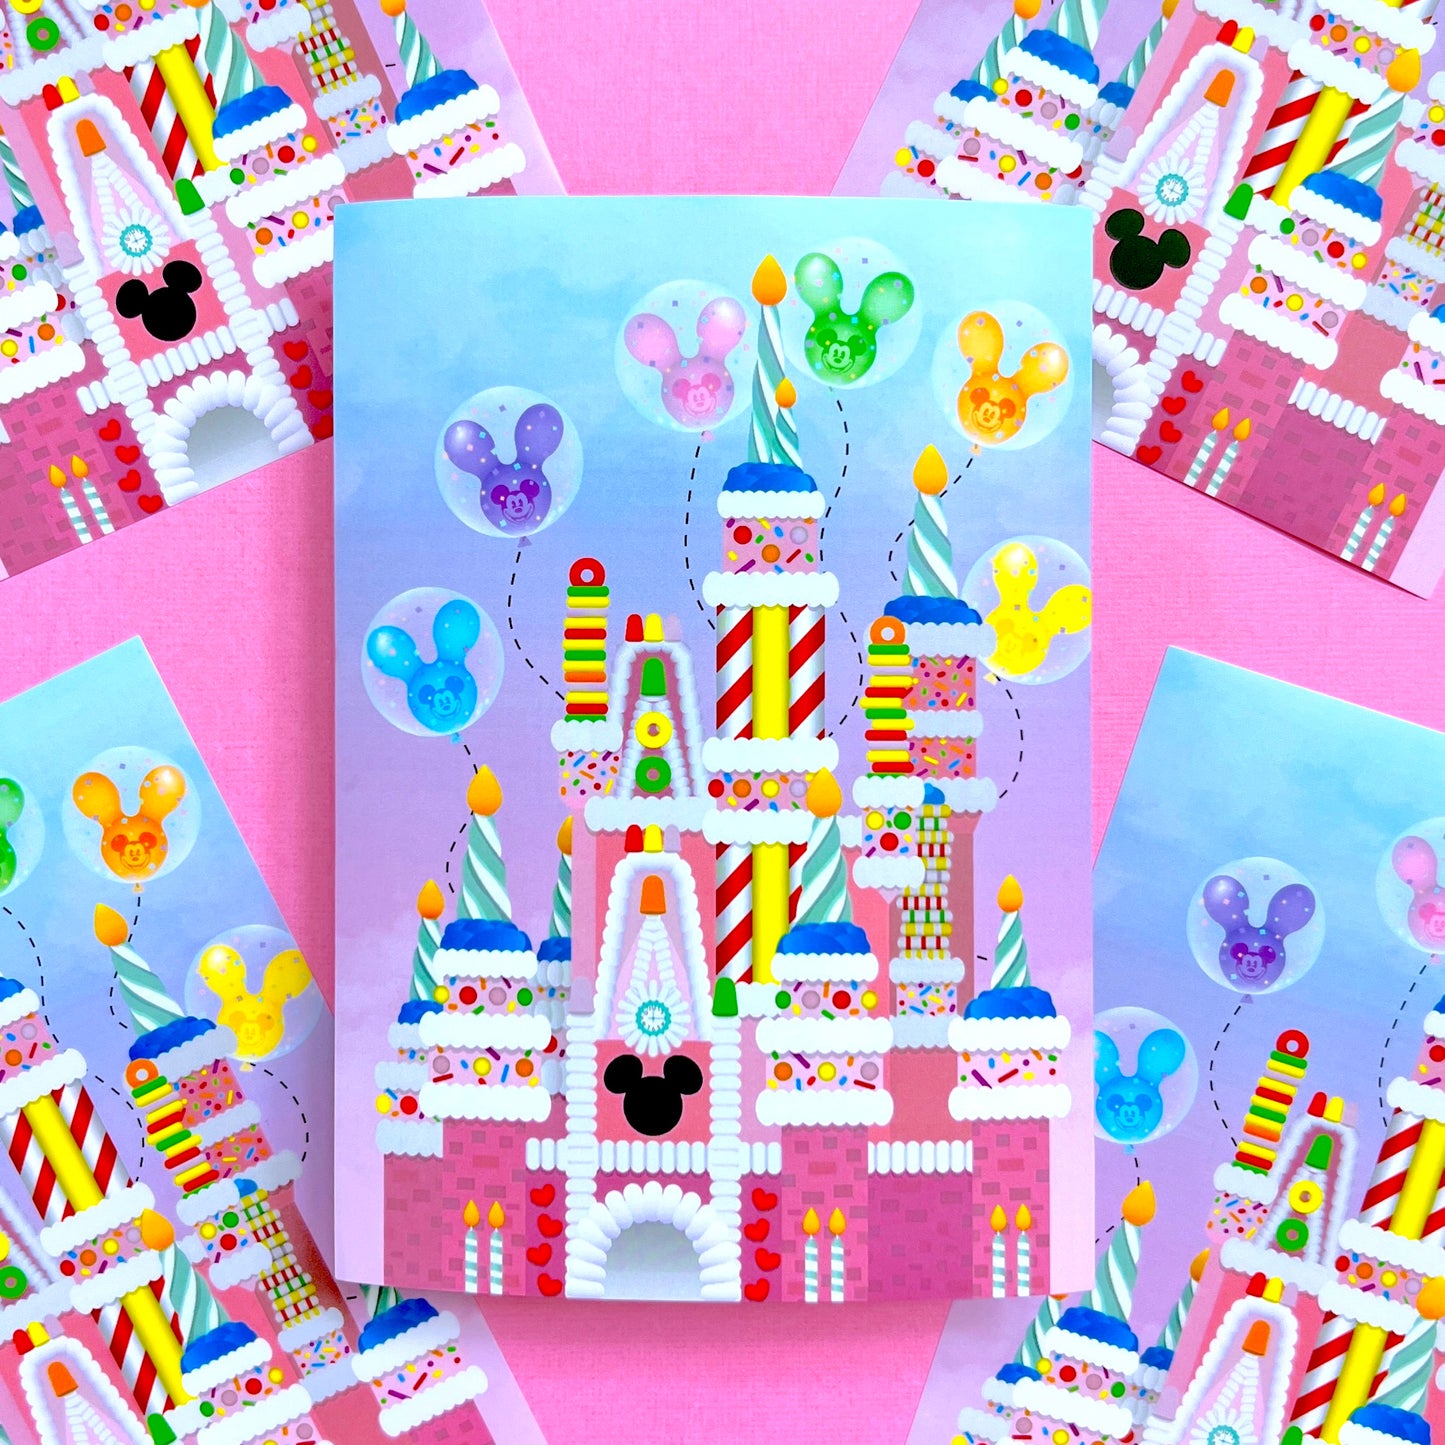 NEW! 5"x7" Full Page Sticker - Cake Castle